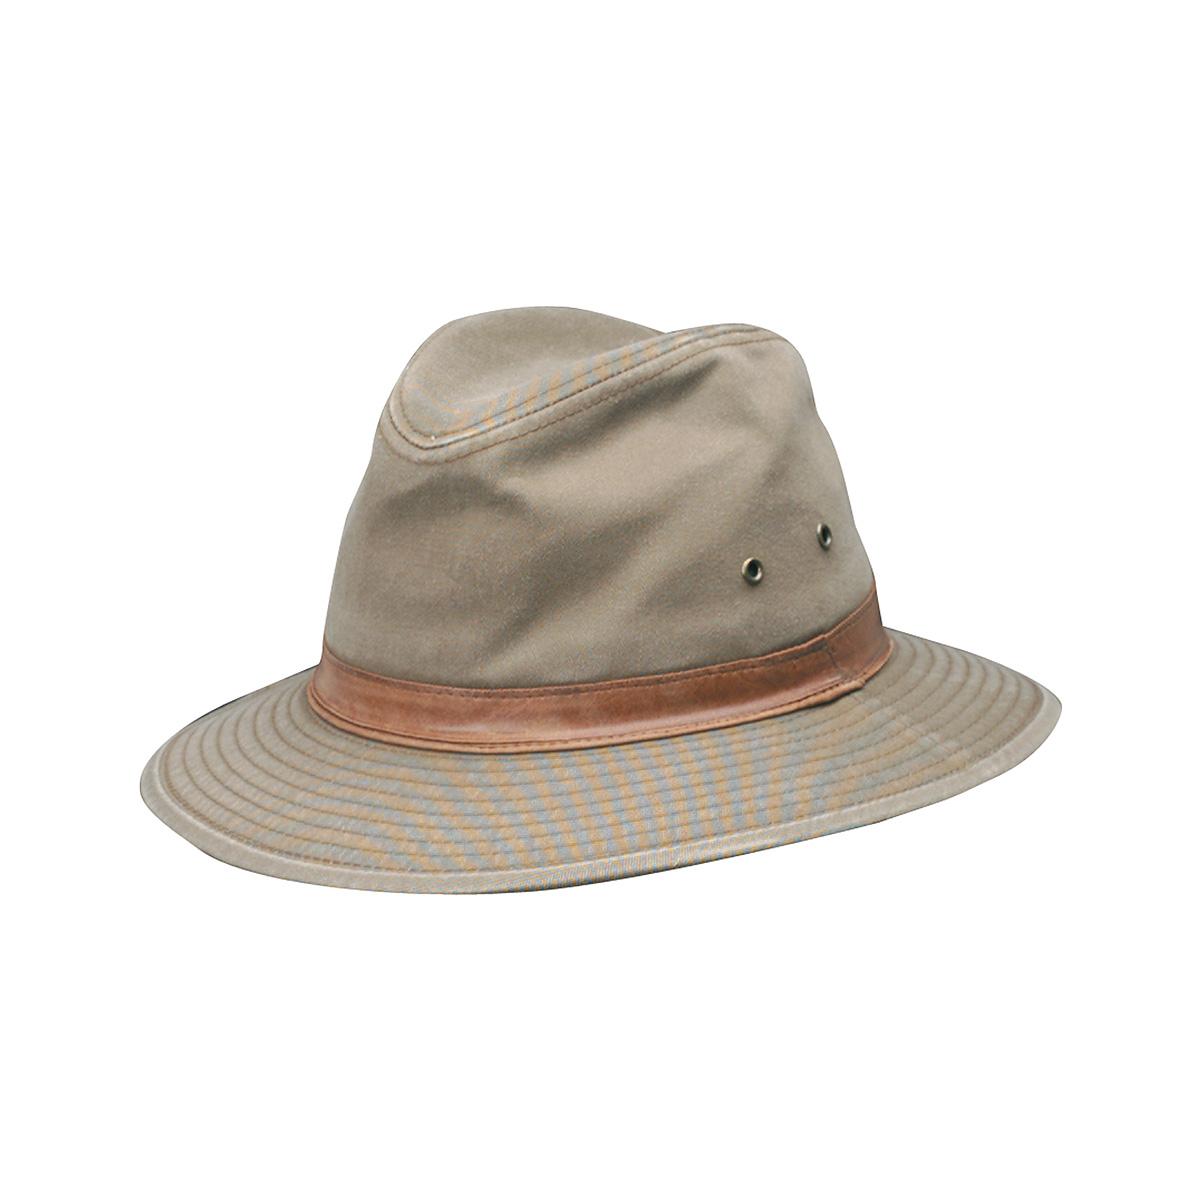 The Nature Company Men Hat XL Made in USA Safari Camping Fishing Outdoor  Brown 